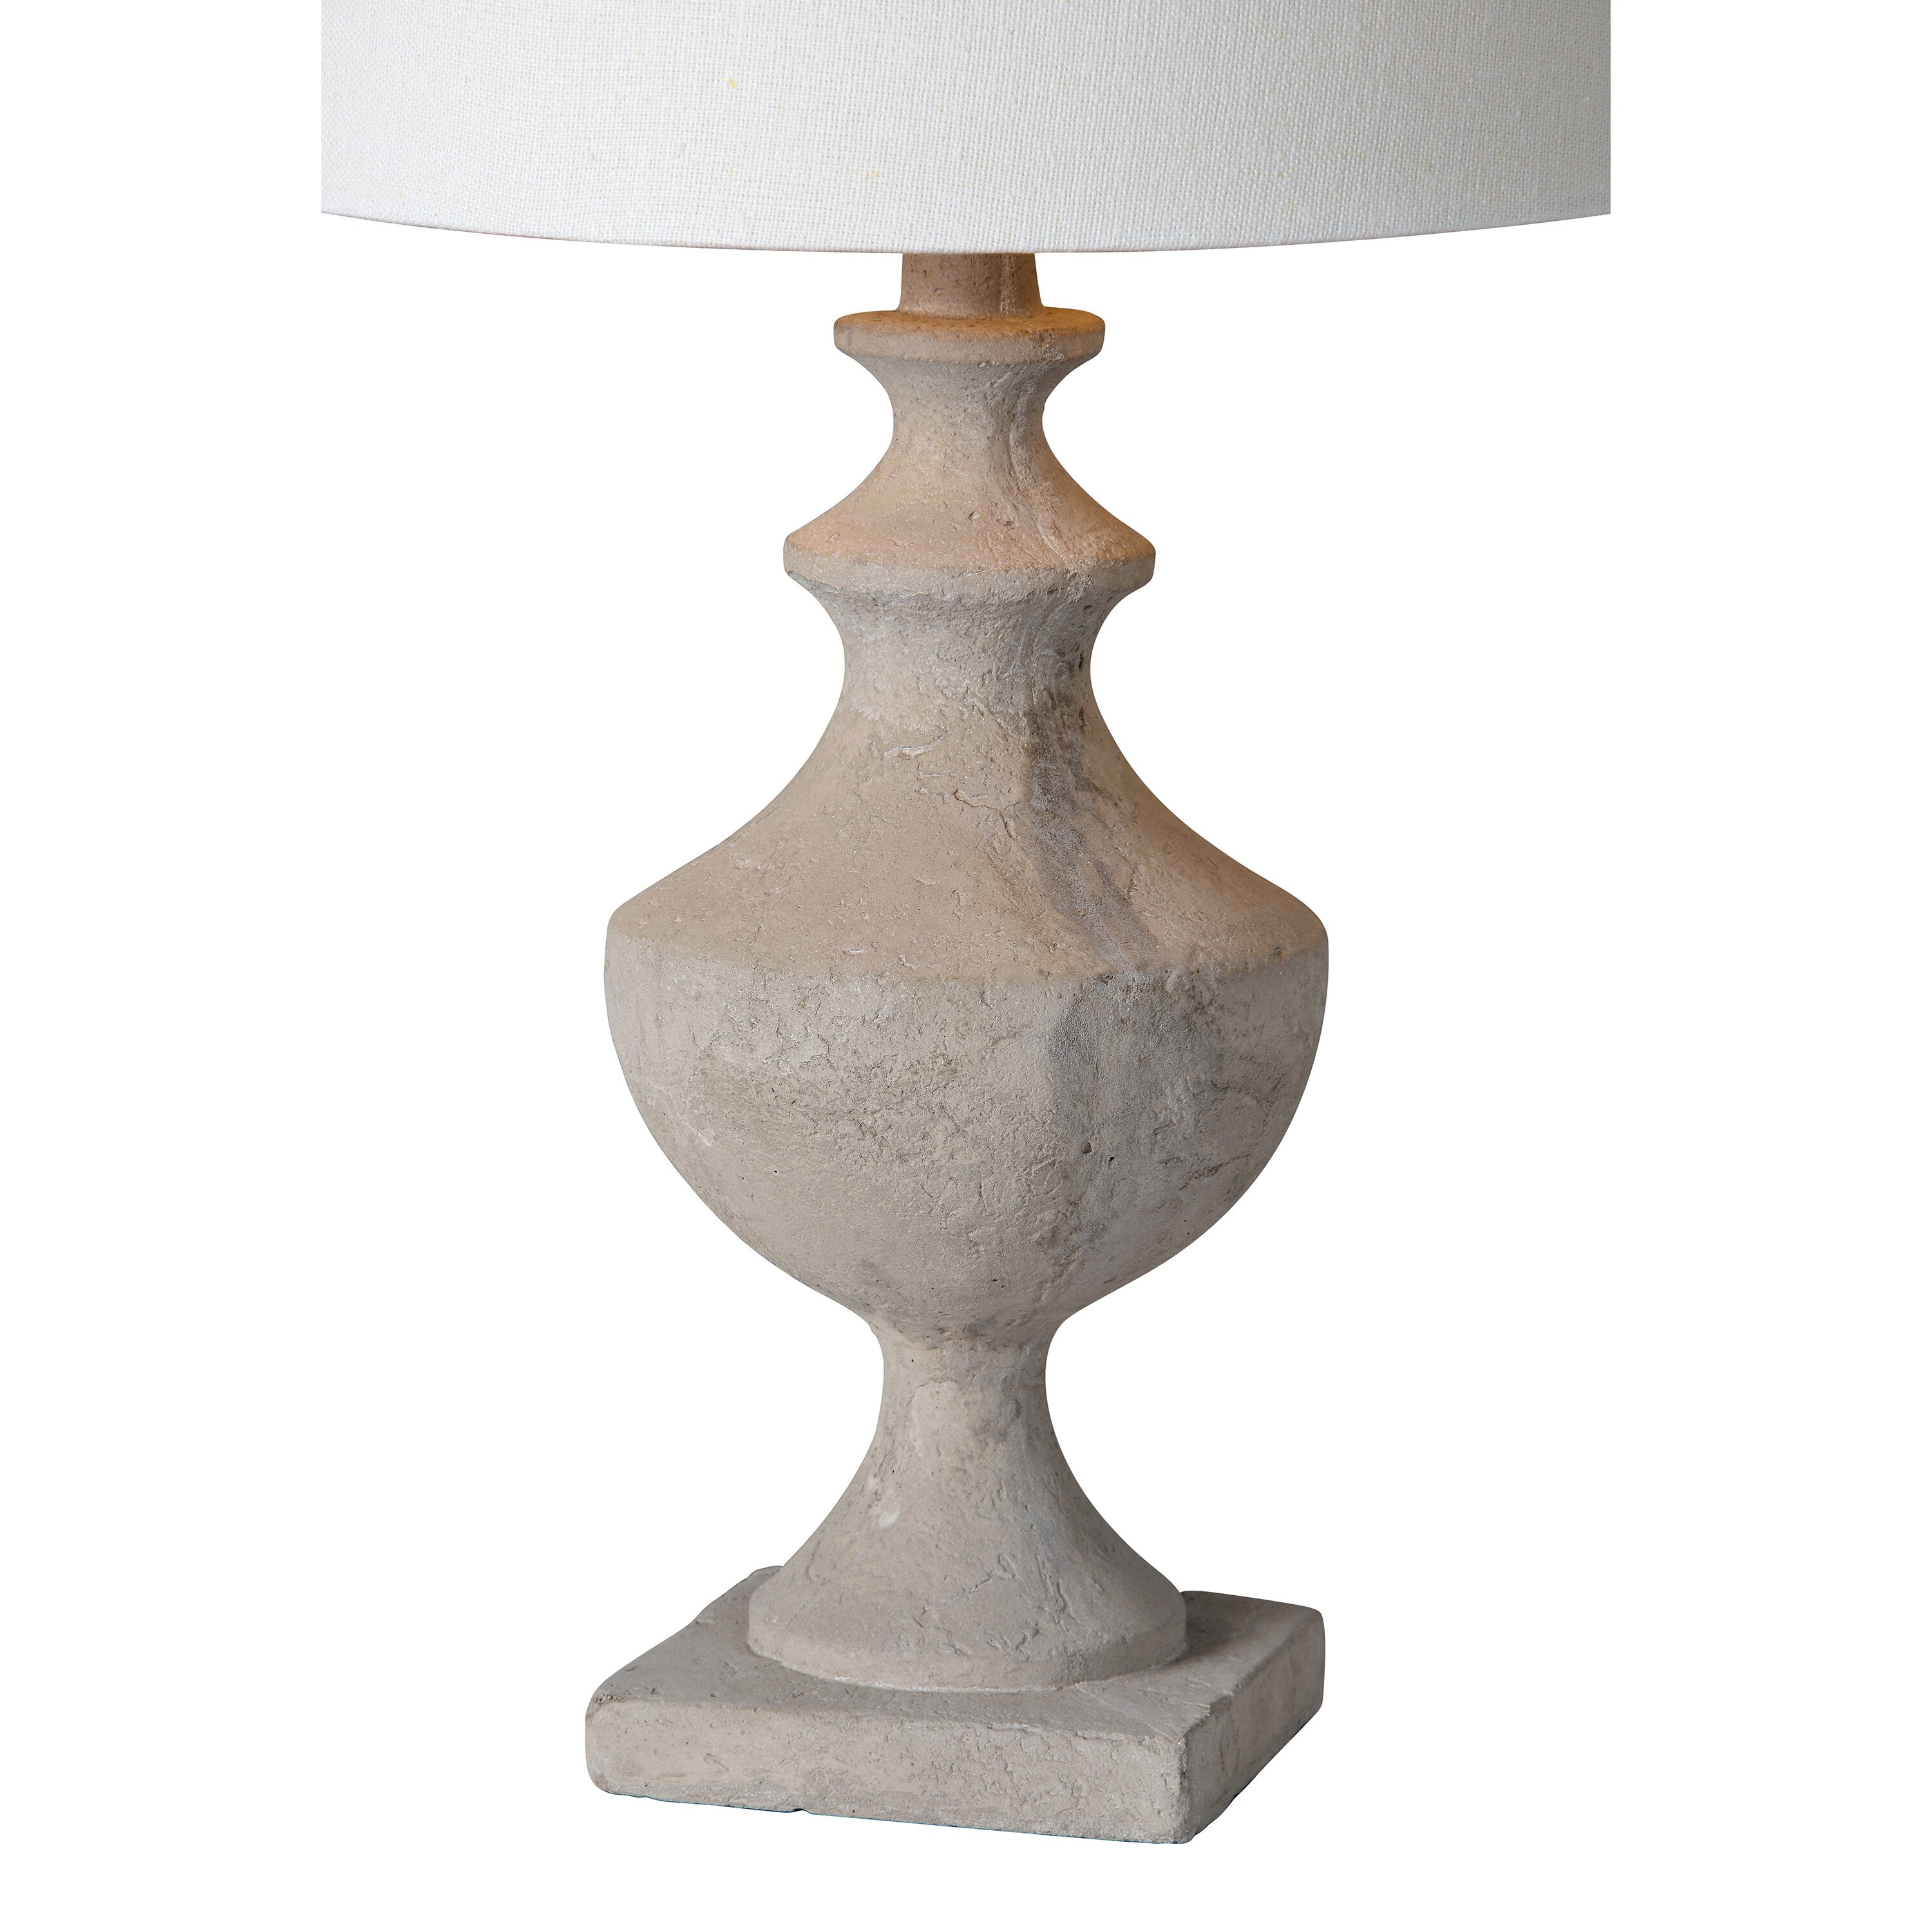 Ren Wil Cimbrone 22" Table Lamp